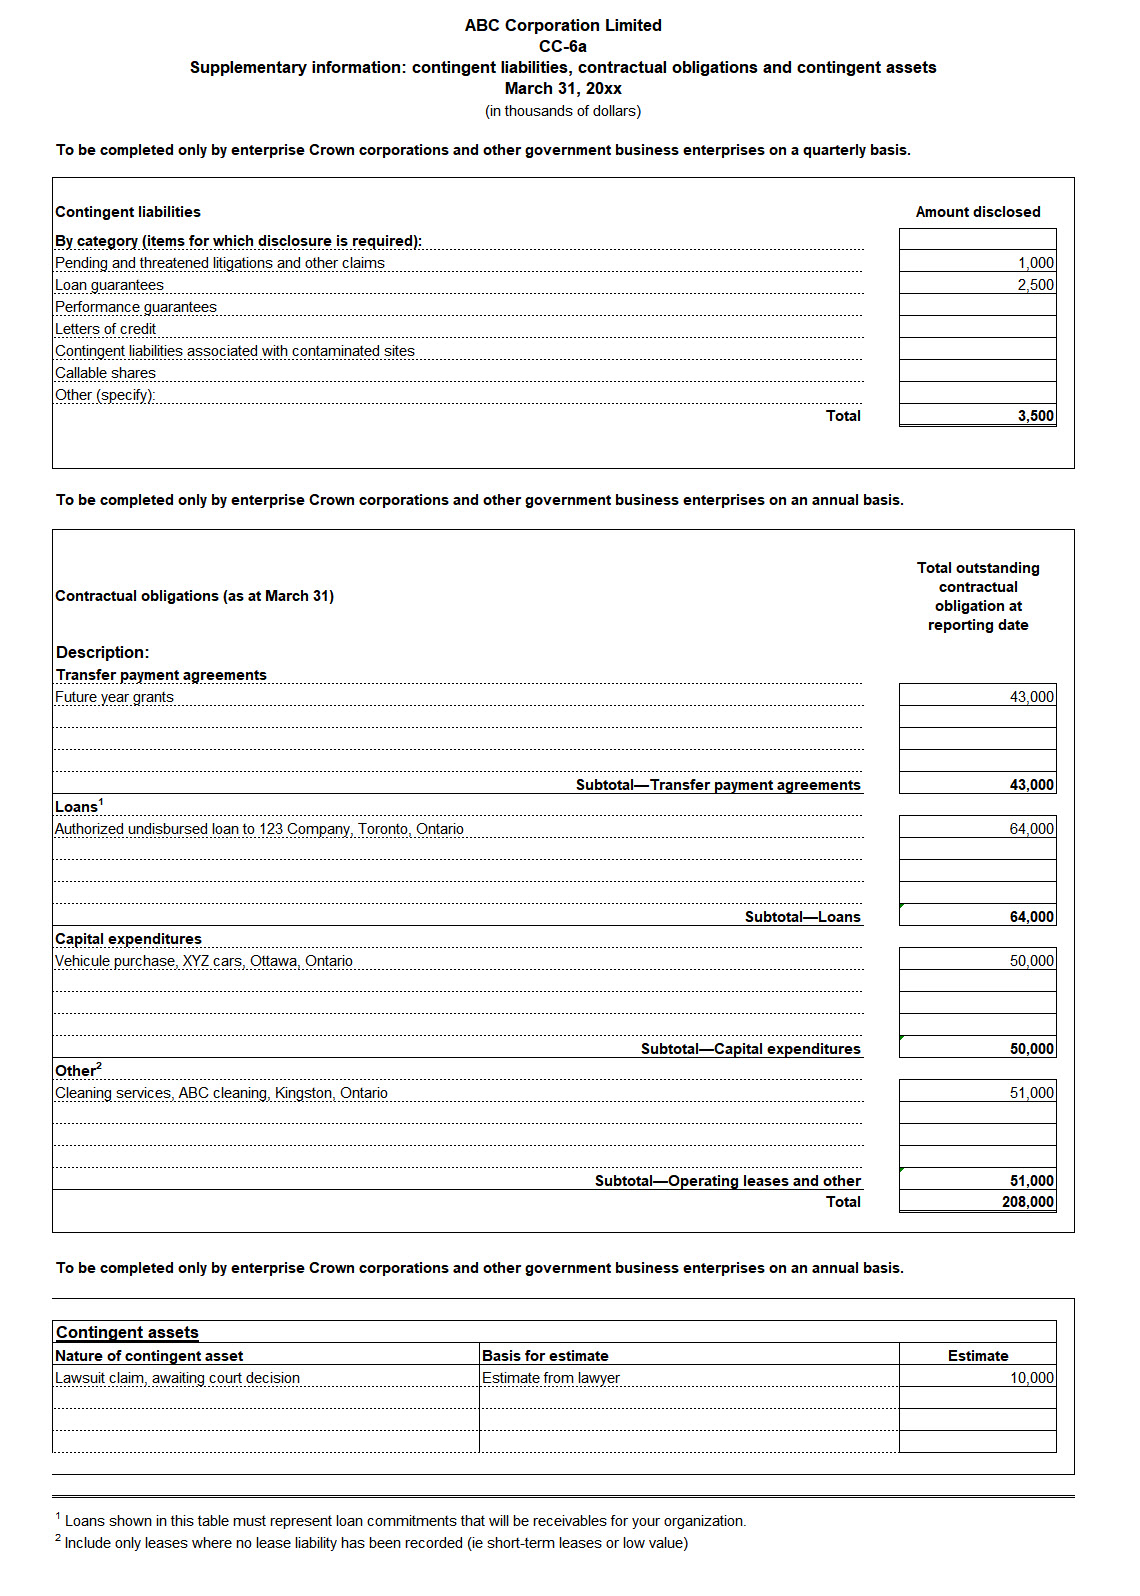 Screen capture of Form CC-6a: Supplementary information—Contingent liabilities, contractual obligations and contingent assets - Text version below the image